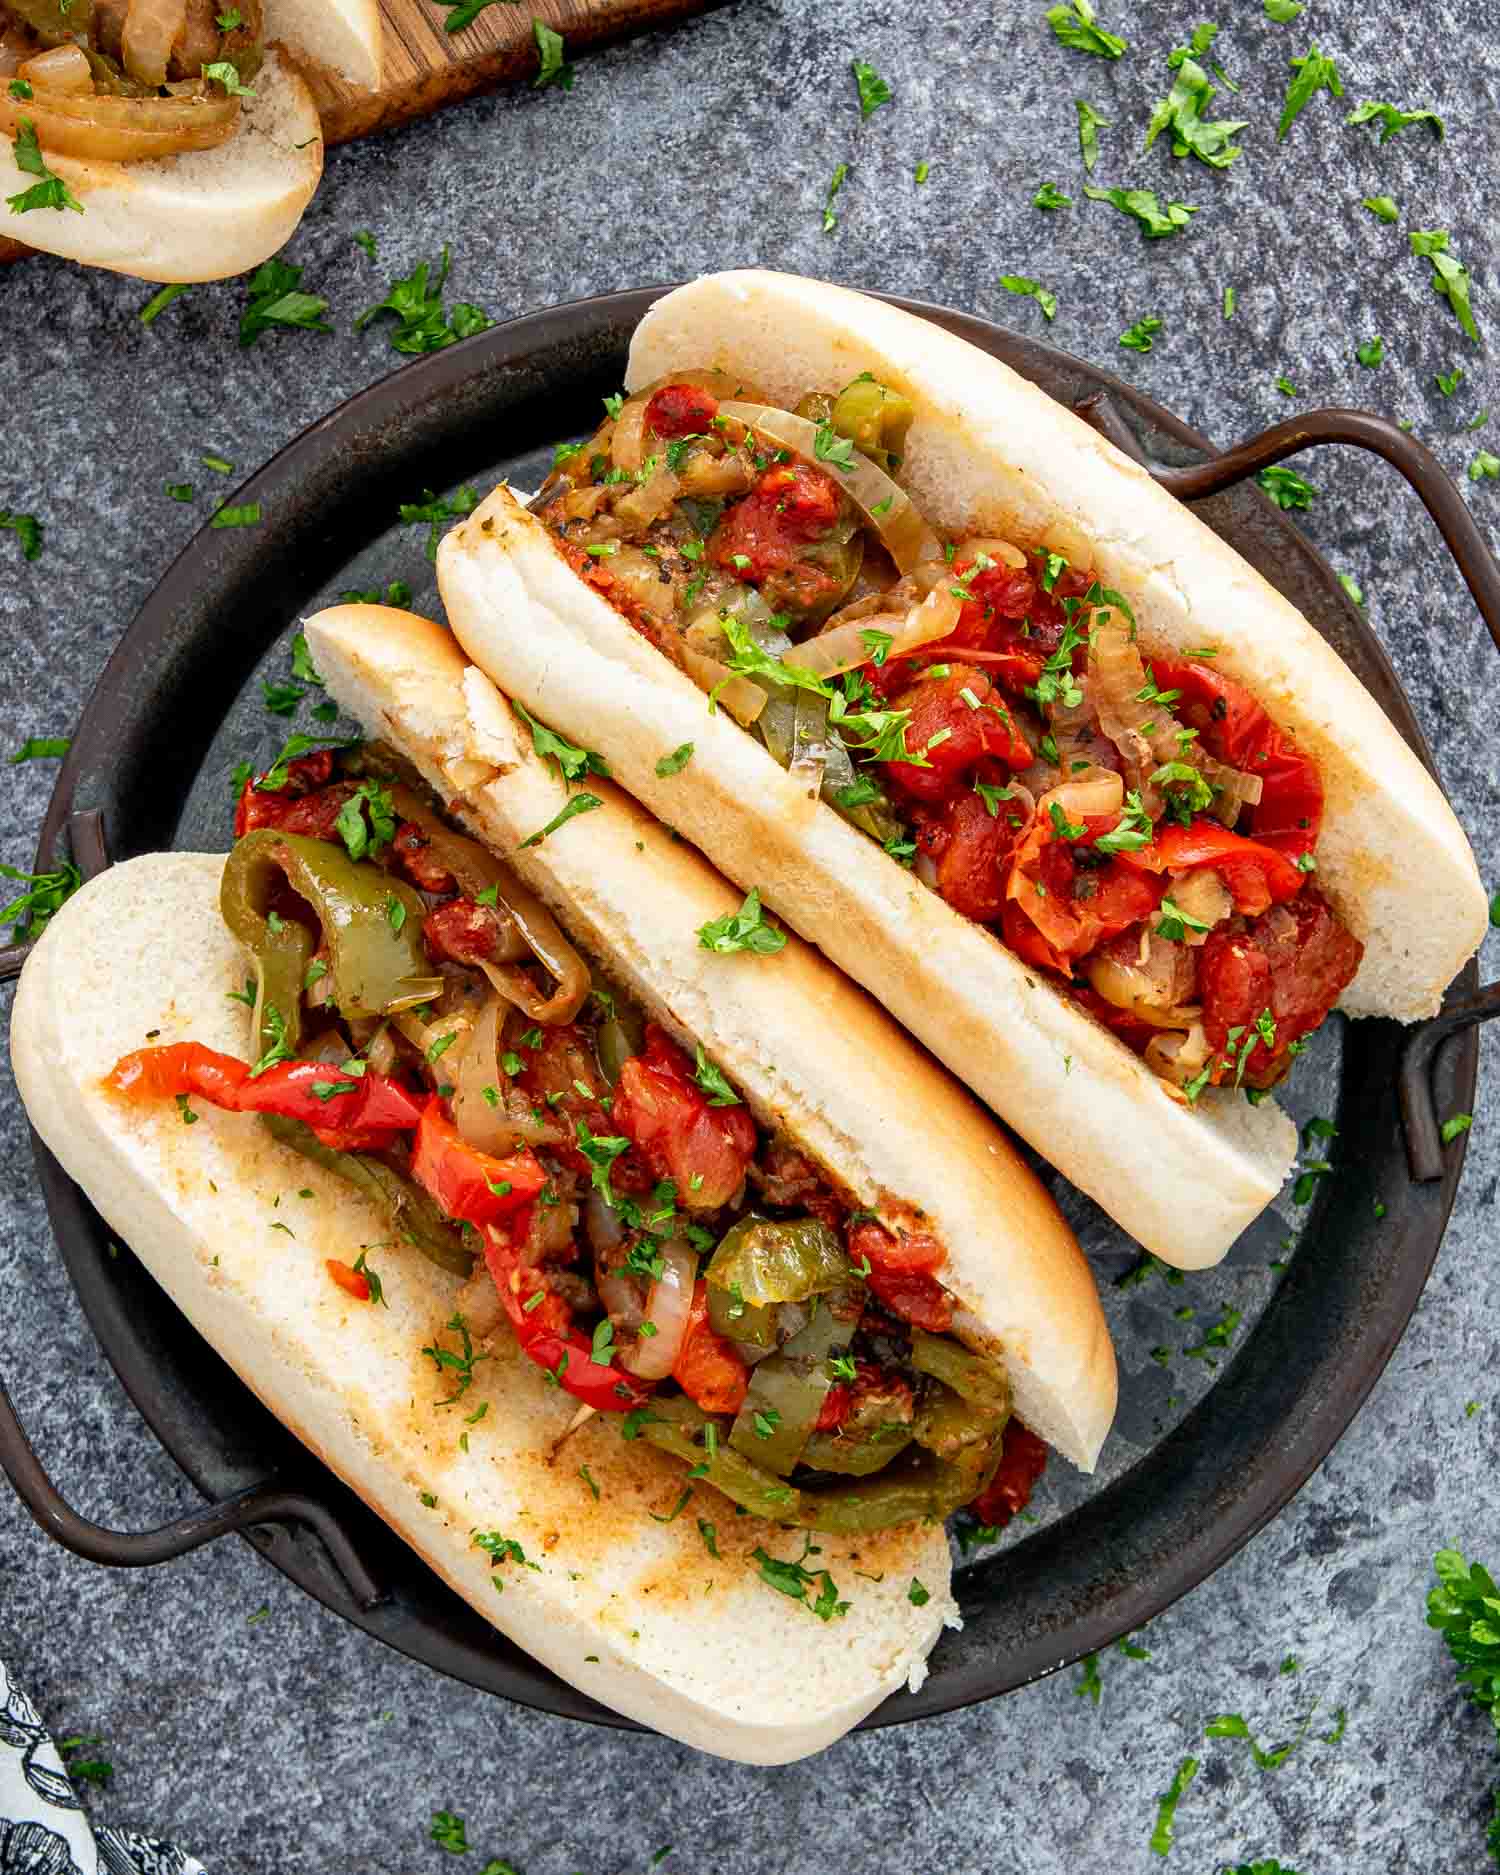 two sausage and peppers hoagie rolls on a plate garnished with some parsley.